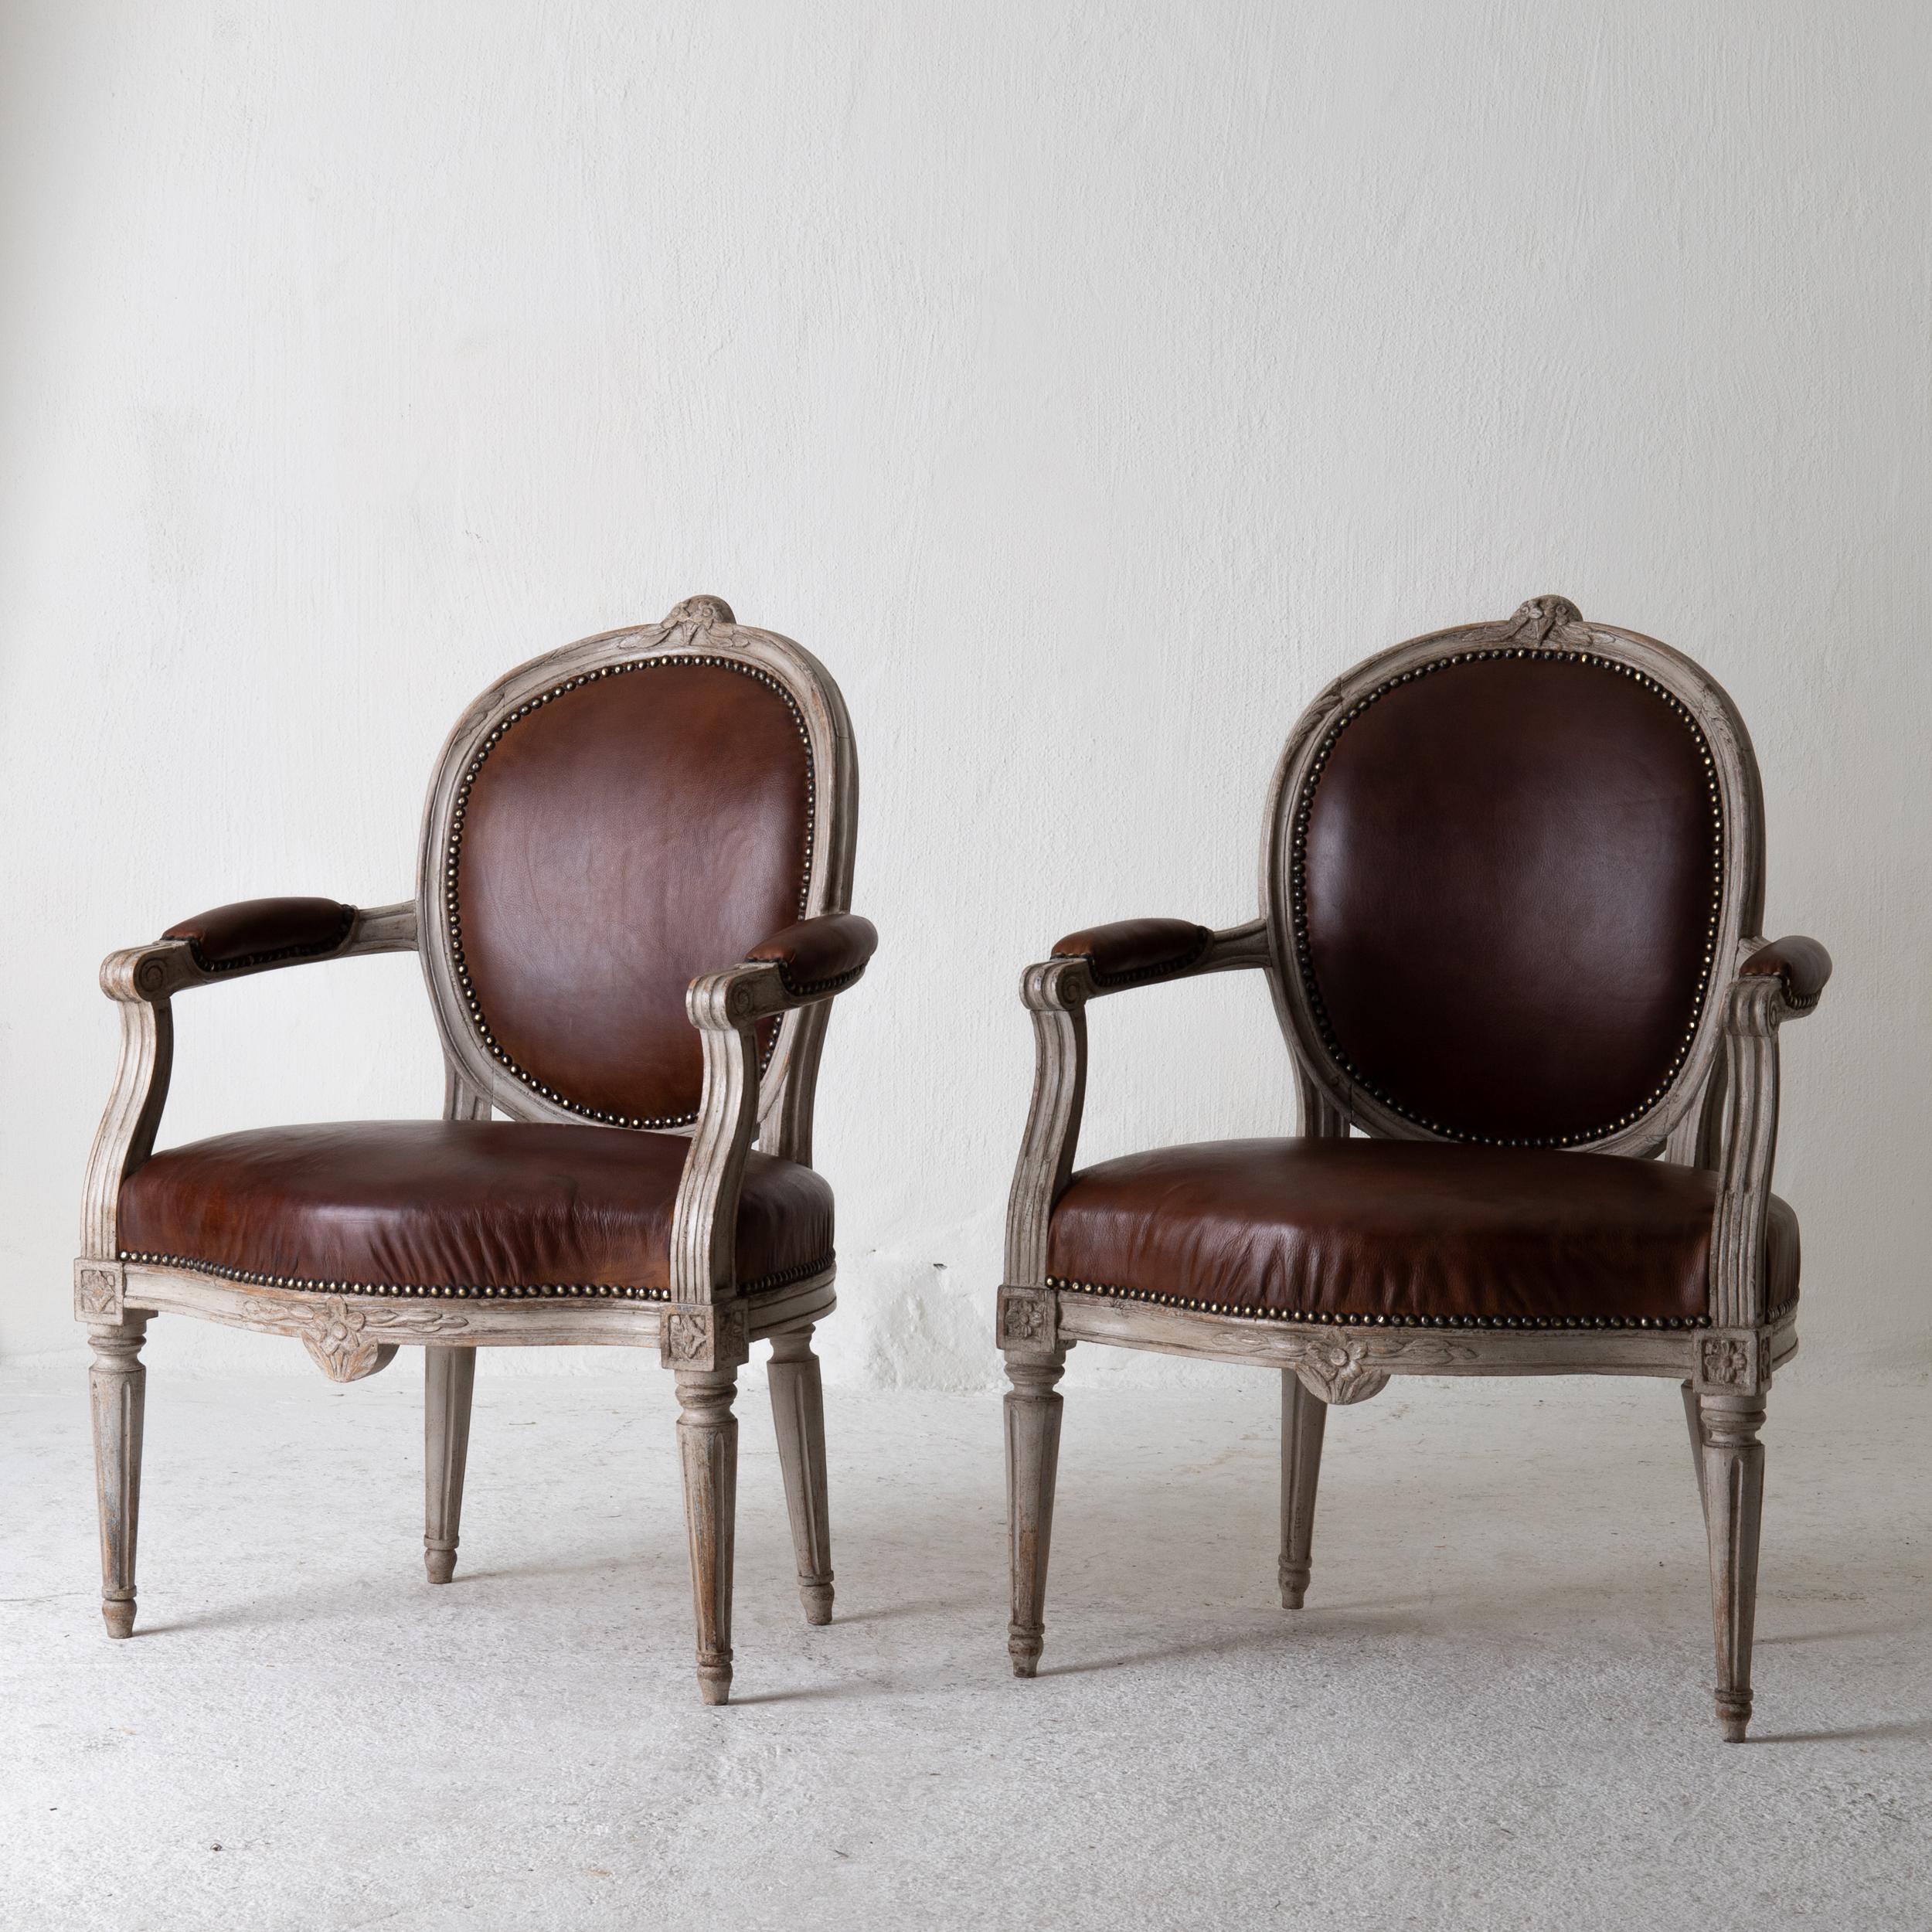 Armchairs Gustavian 1780-1800 Swedish gray frame brown leather, Sweden. A pair of armchairs made during the early Gustavian period in Sweden 1780-1800. Painted in a gray and upholstered on seat, back and armrests in a waxed leather. Beautiful